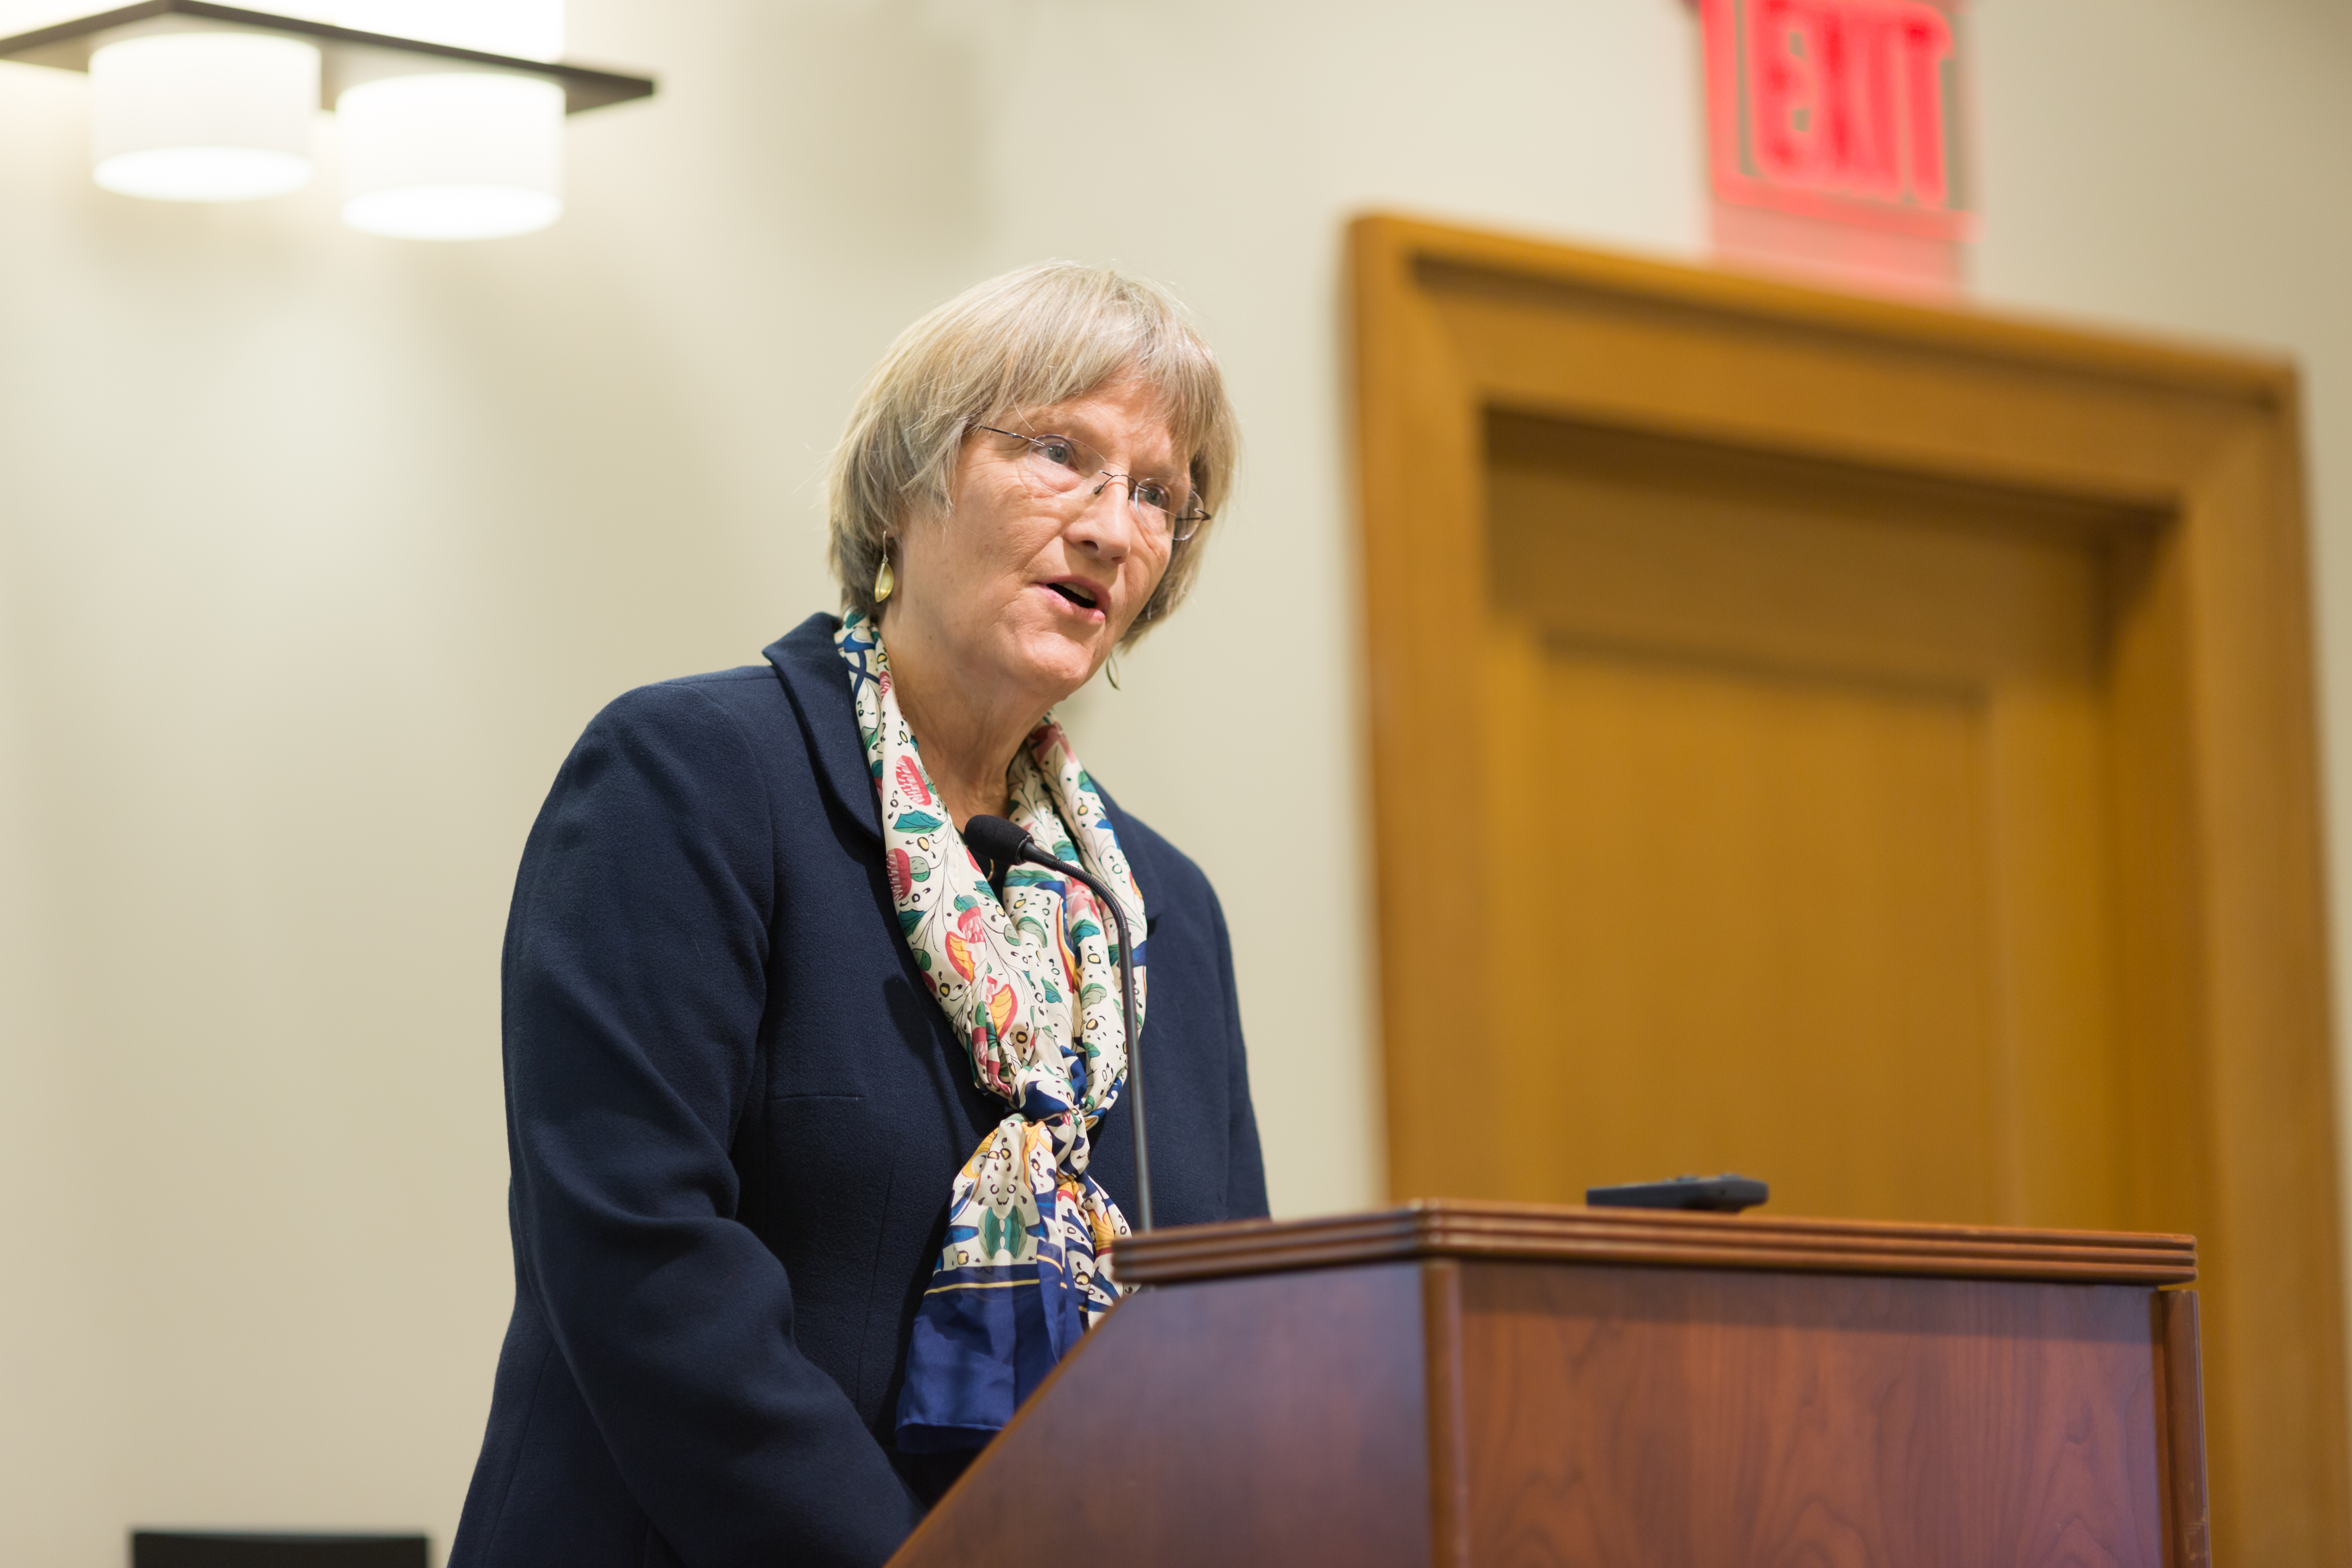 President Drew Faust provides welcome remarks to conference attendees